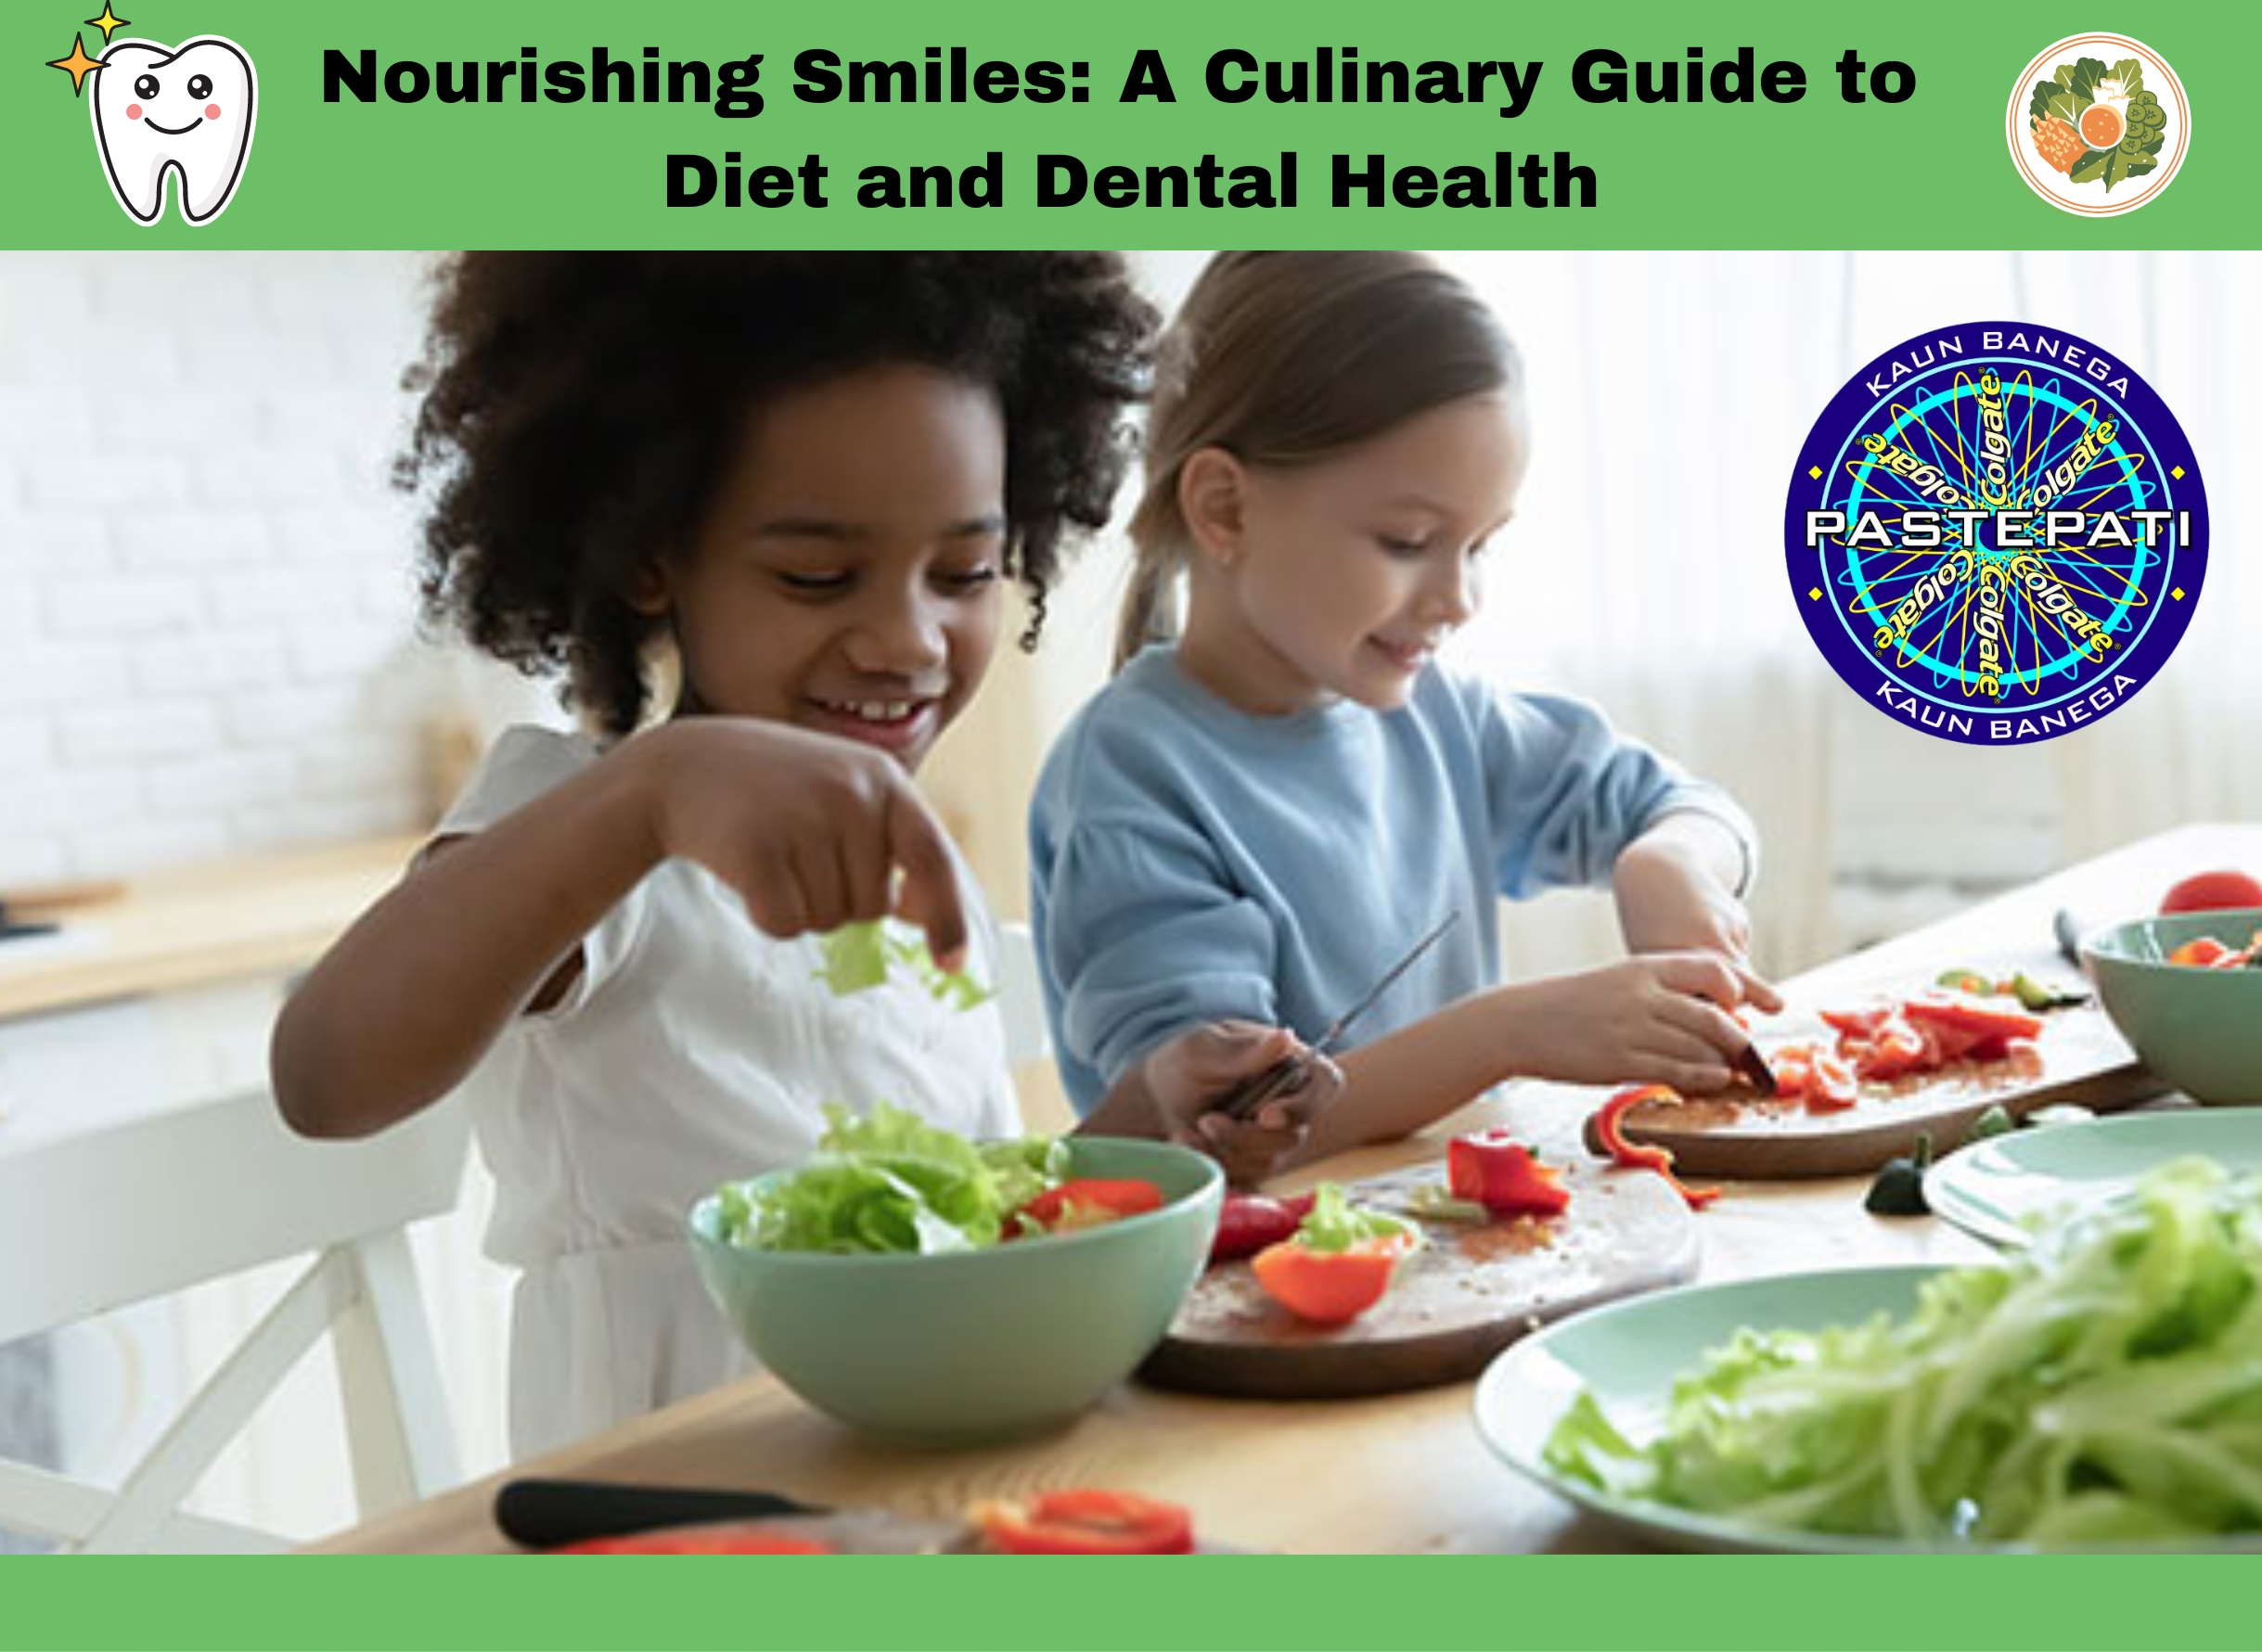 Nourishing Smiles: A Culinary Guide to Diet and Dental Health